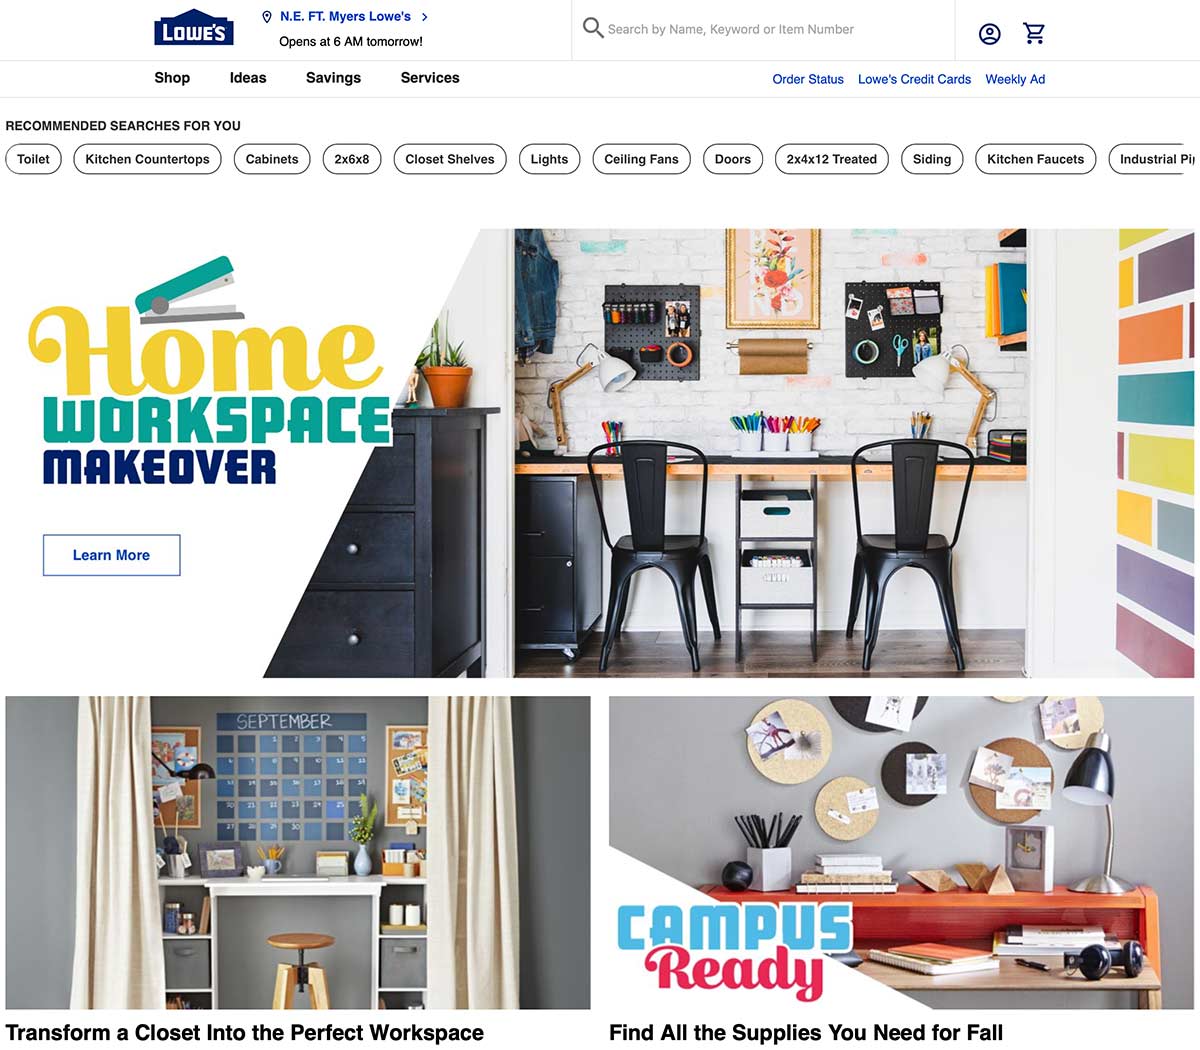 Lowe's home page featuring home office space